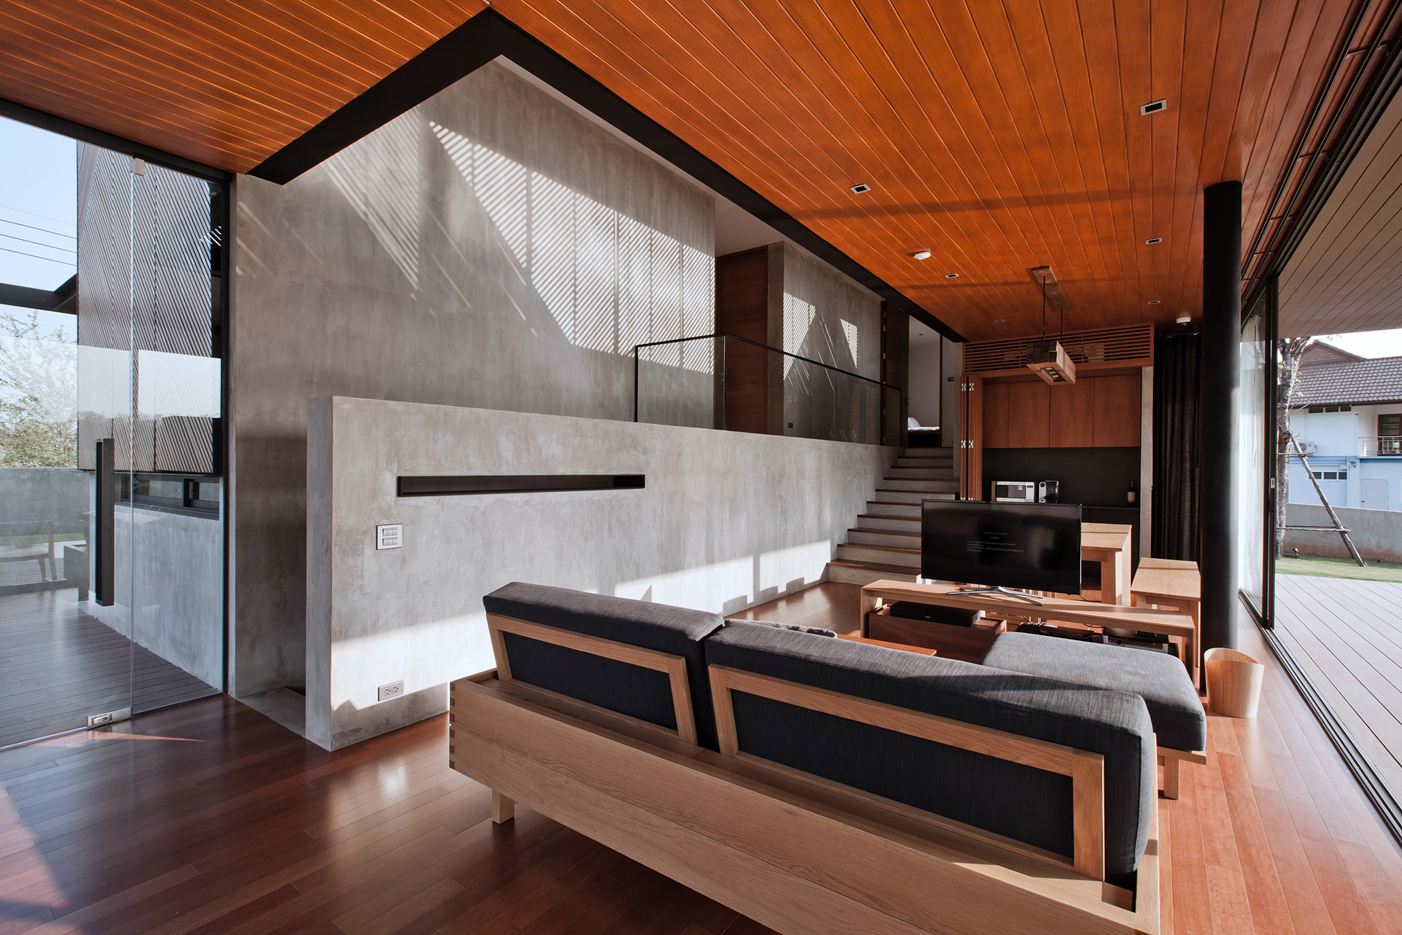 KA House in Pak Chong, Thailand by IDIN Architects